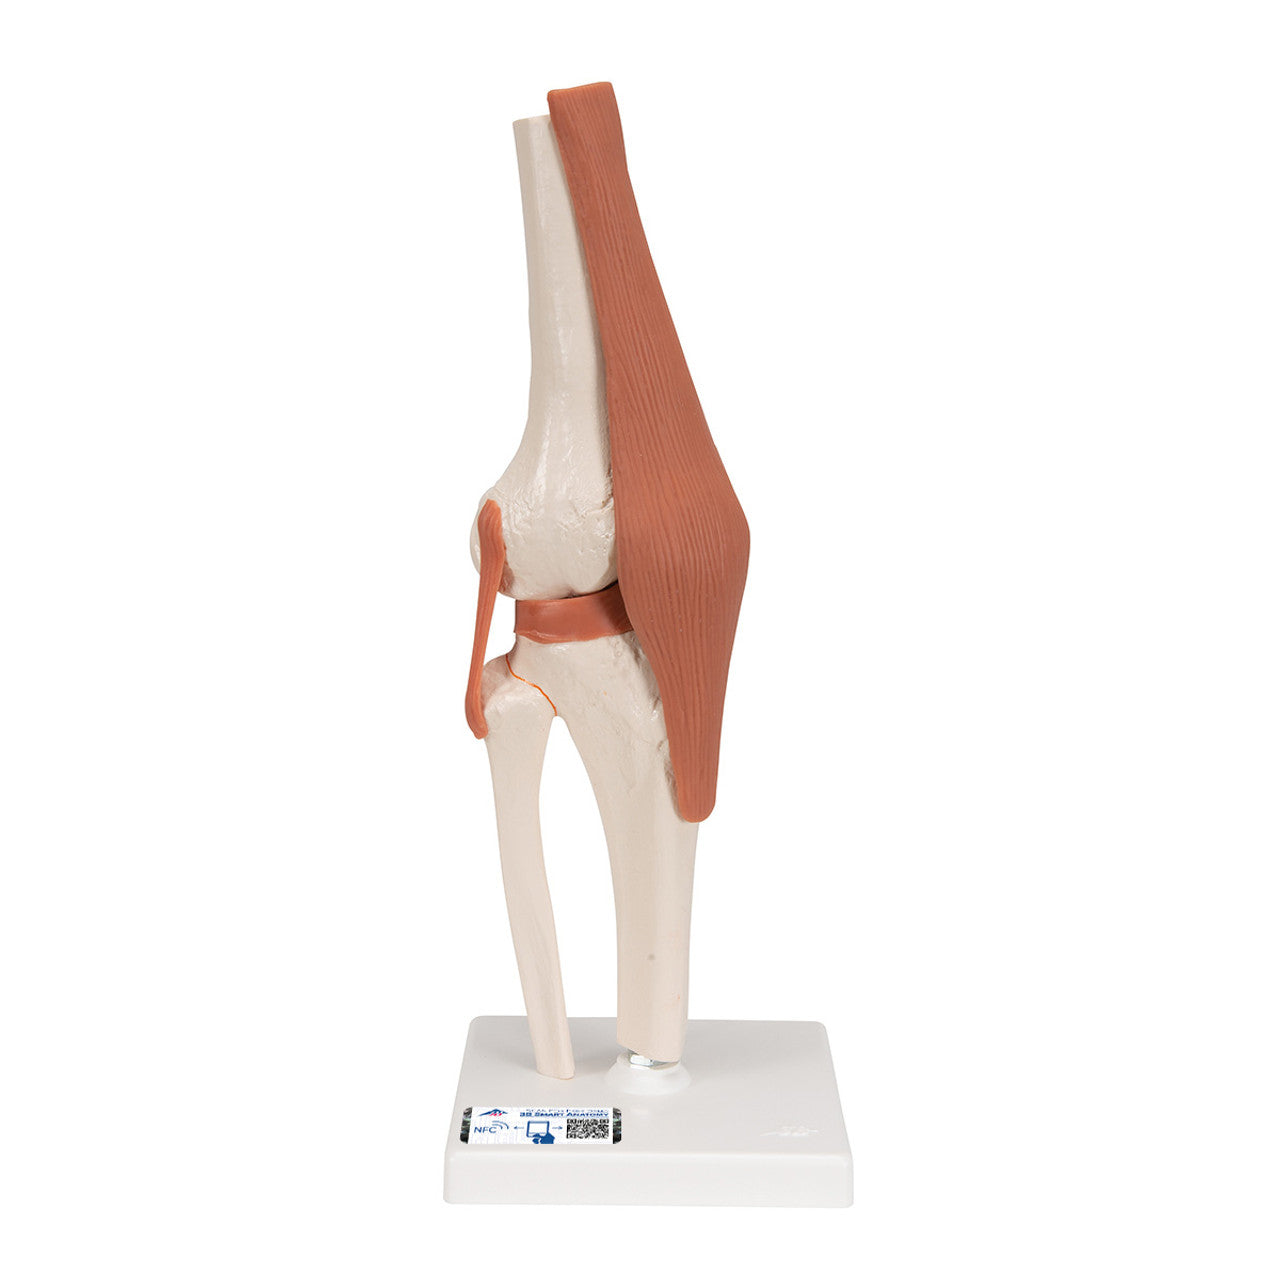 FUNCTIONAL KNEE JOINT